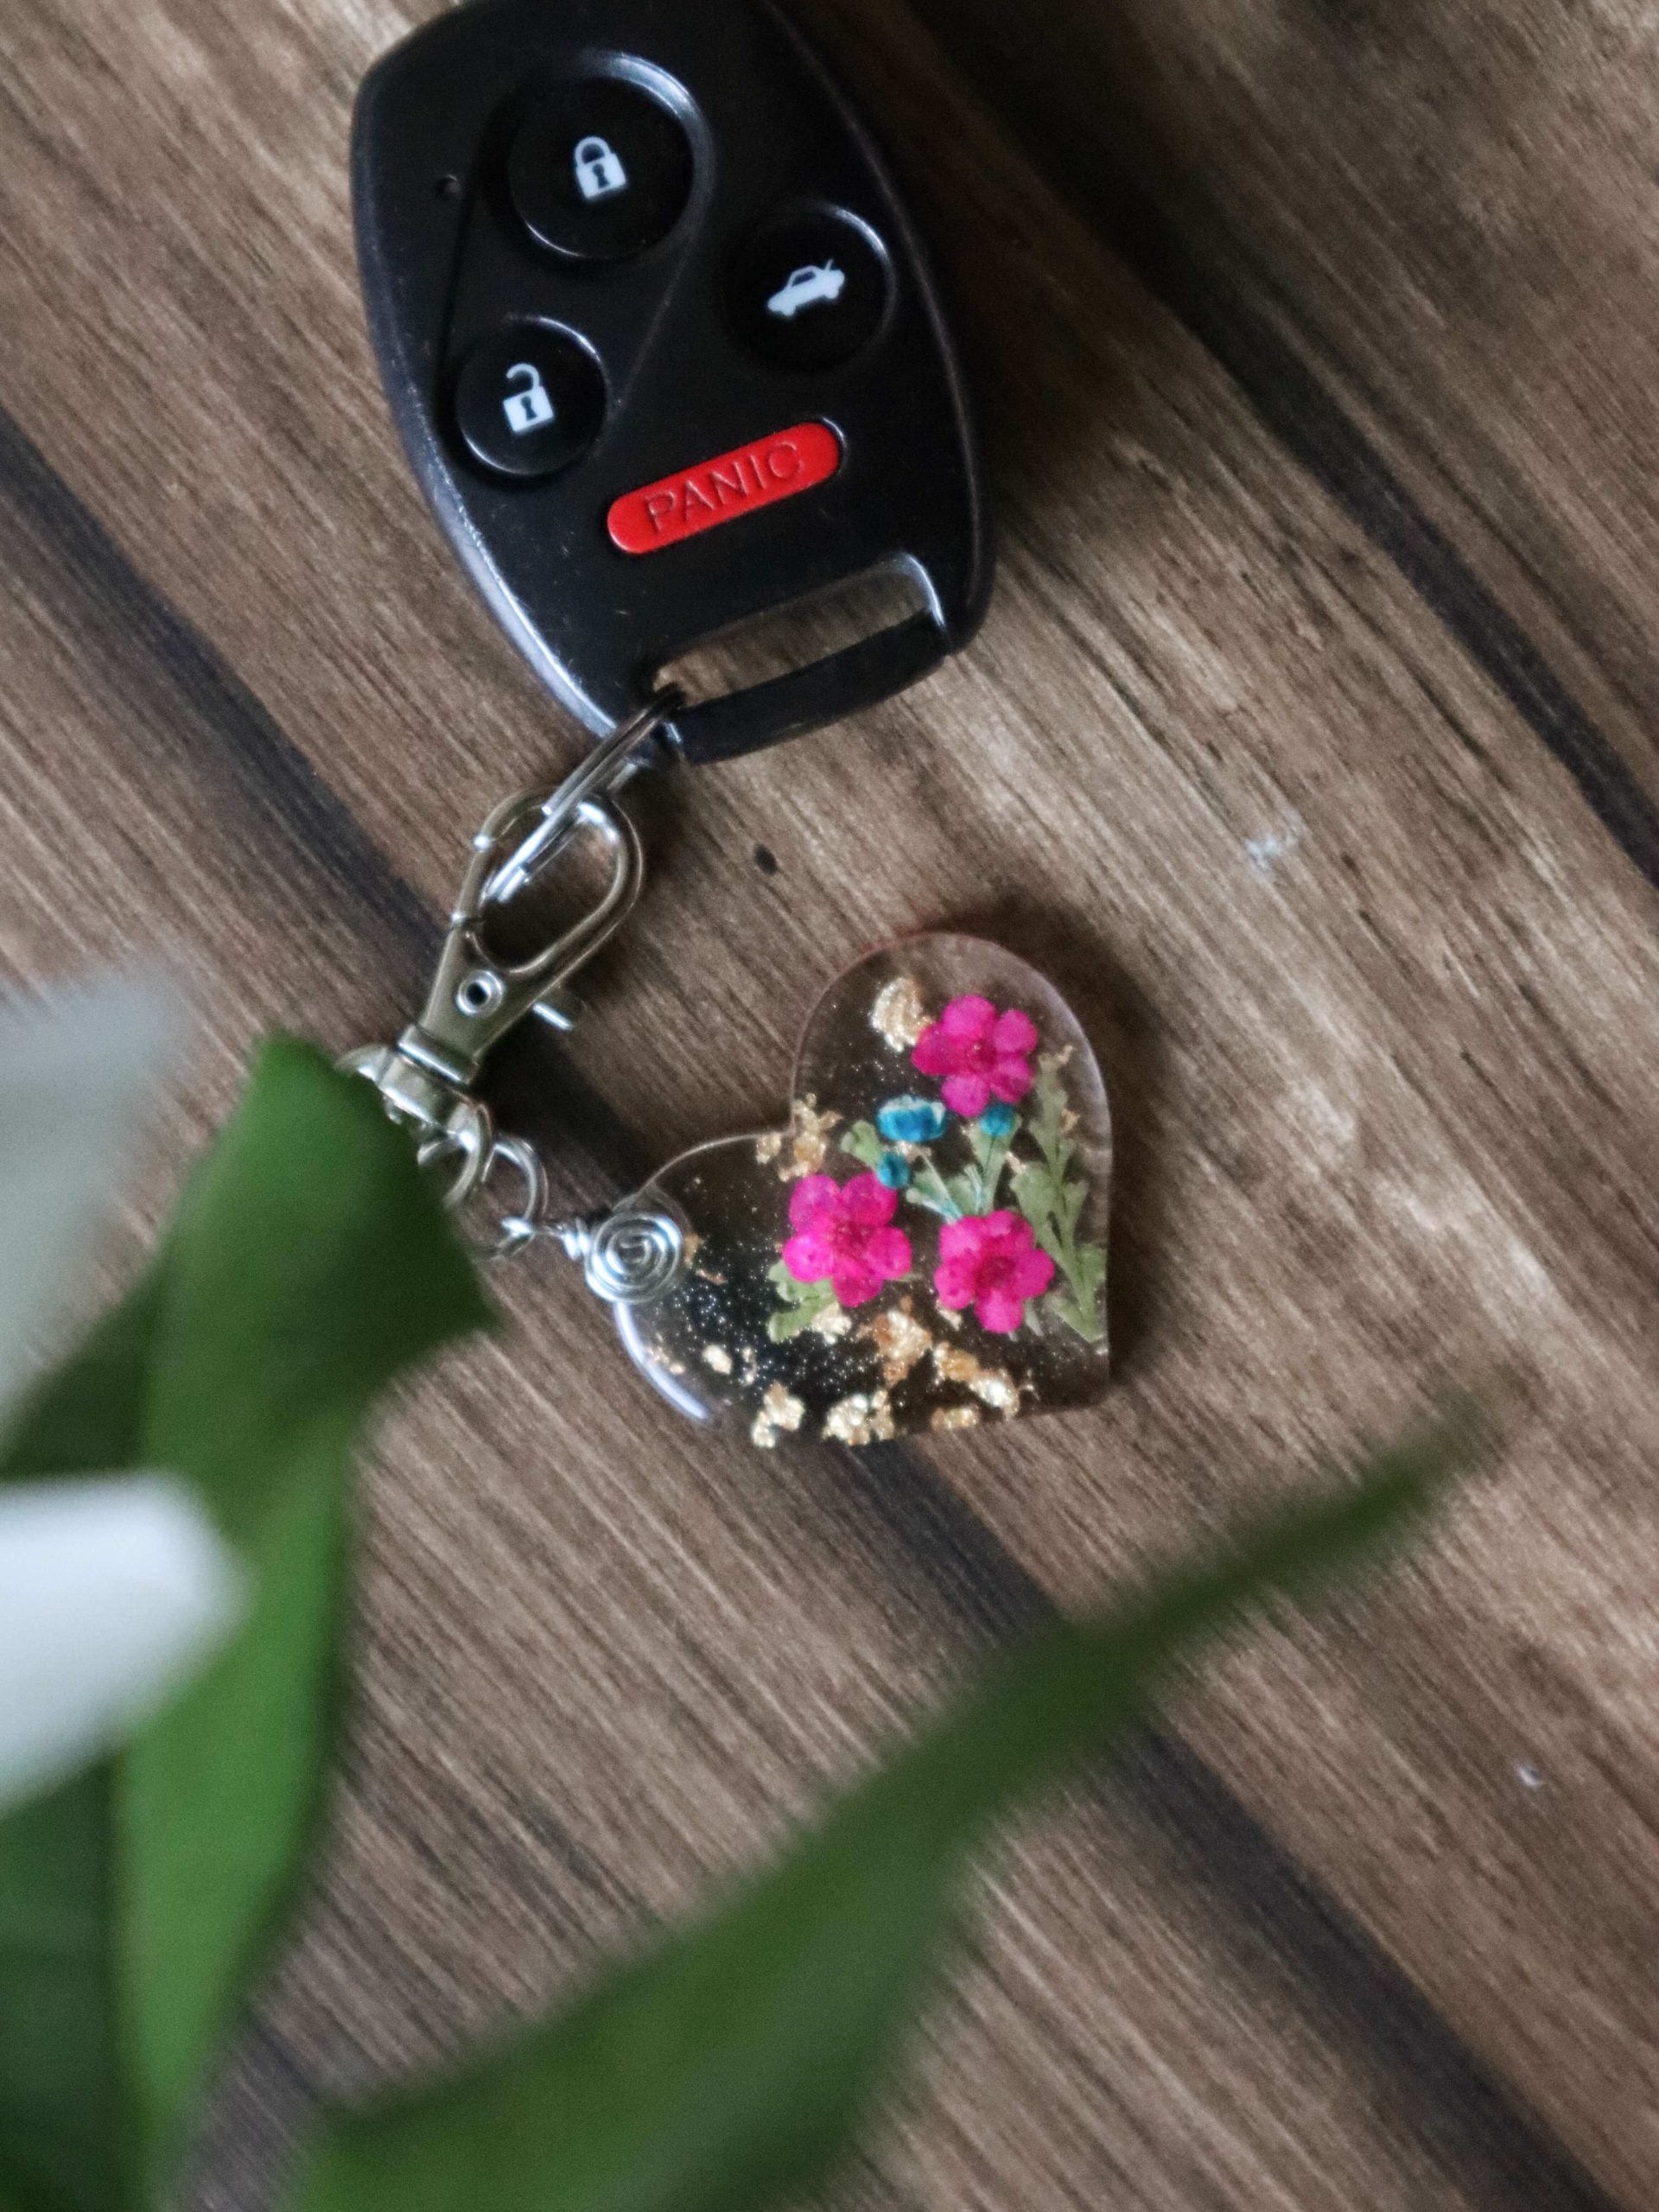 My Store Flower Resin Charms - Elegant Flower Planner & Keychain Charms Circle Flower Charm